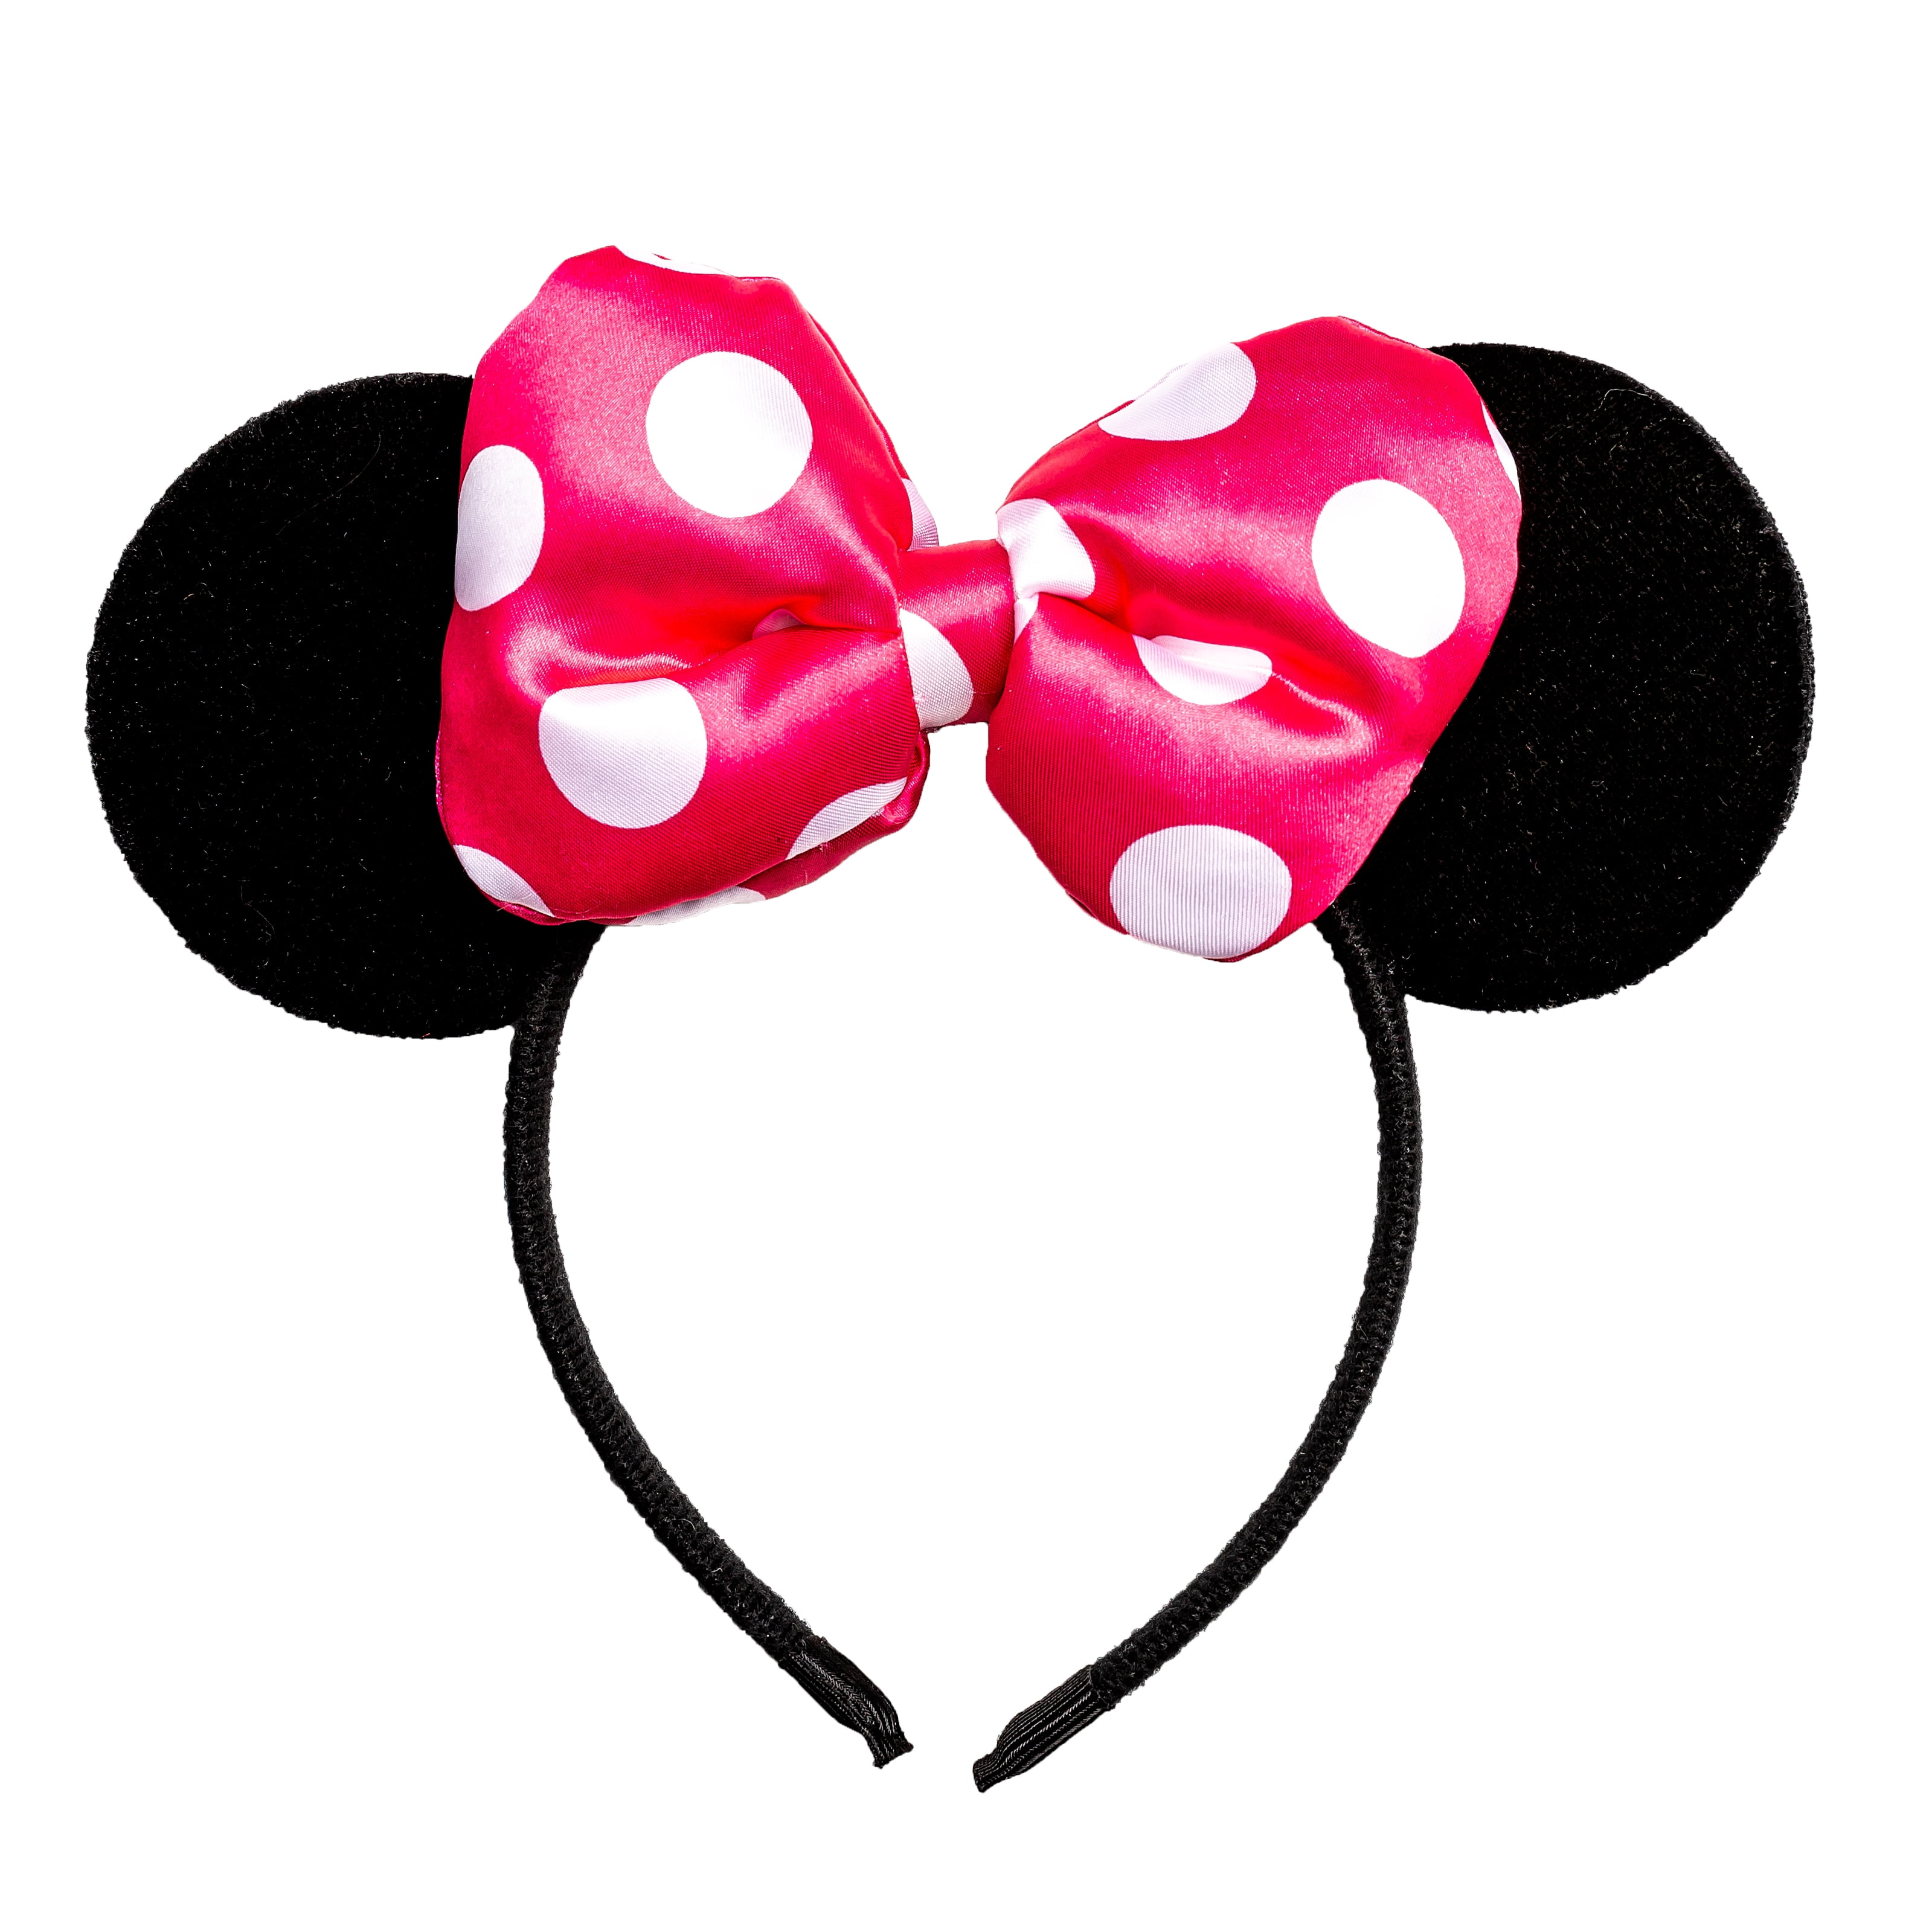 Details about   Disney Park Mickey Pink White Polka Dot Minnie Mouse Ears Party Cos Headband 